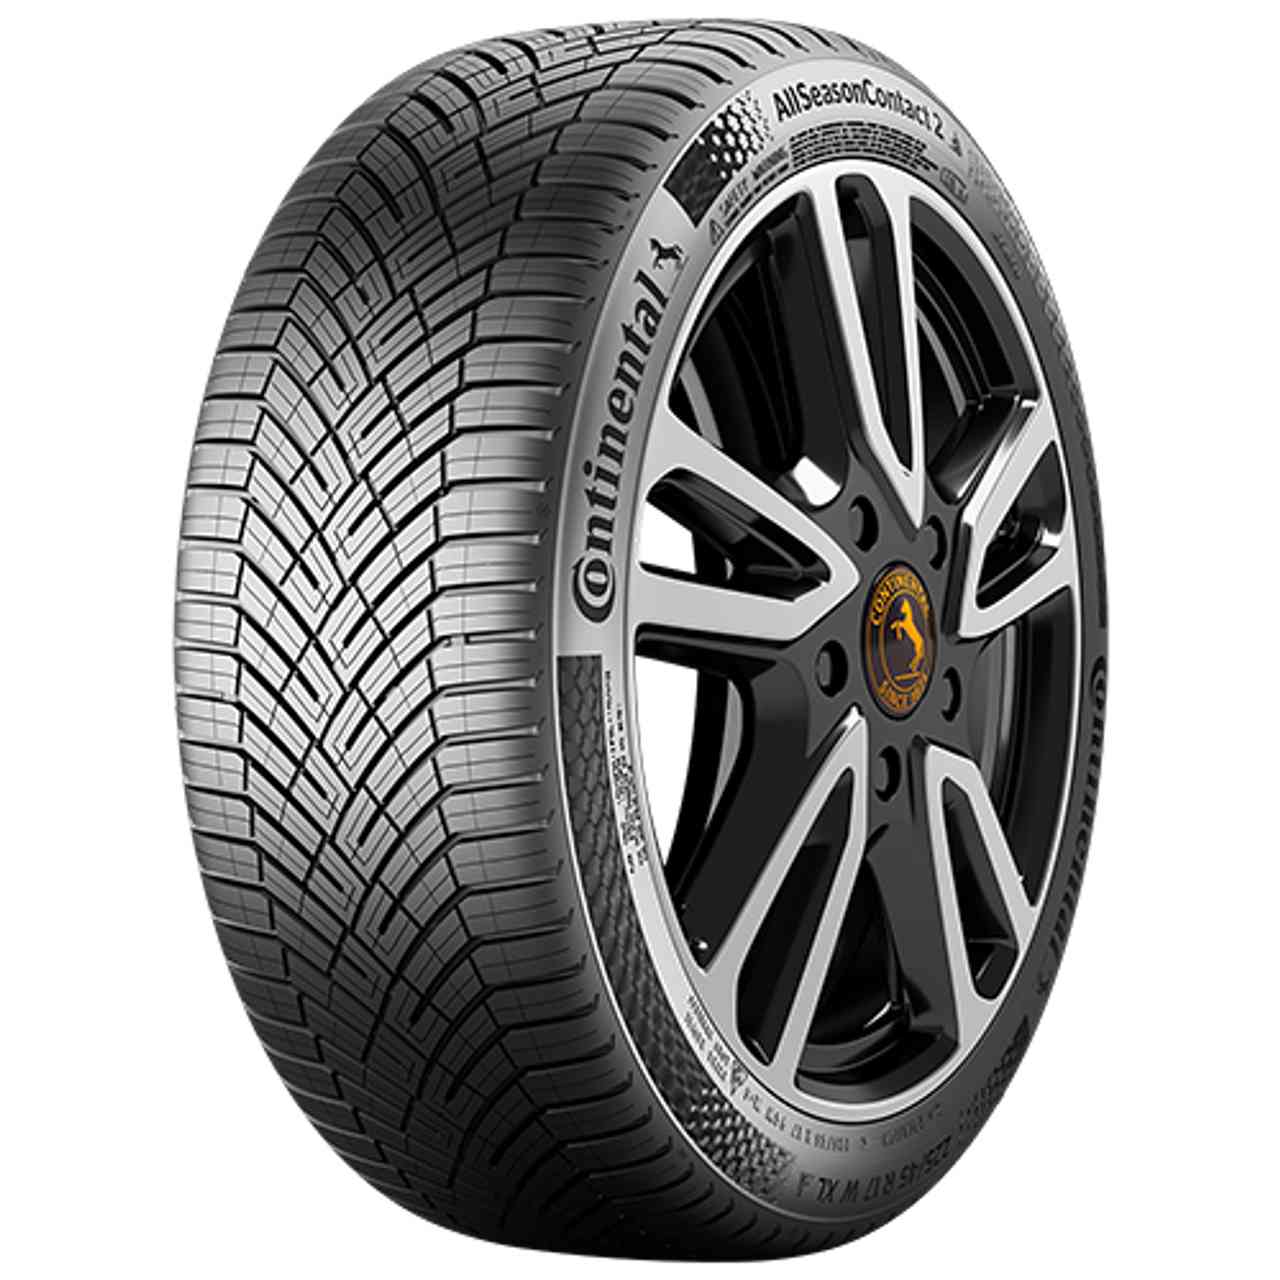 CONTINENTAL ALLSEASONCONTACT 2 (EVc) 255/45R20 105W FR BSW